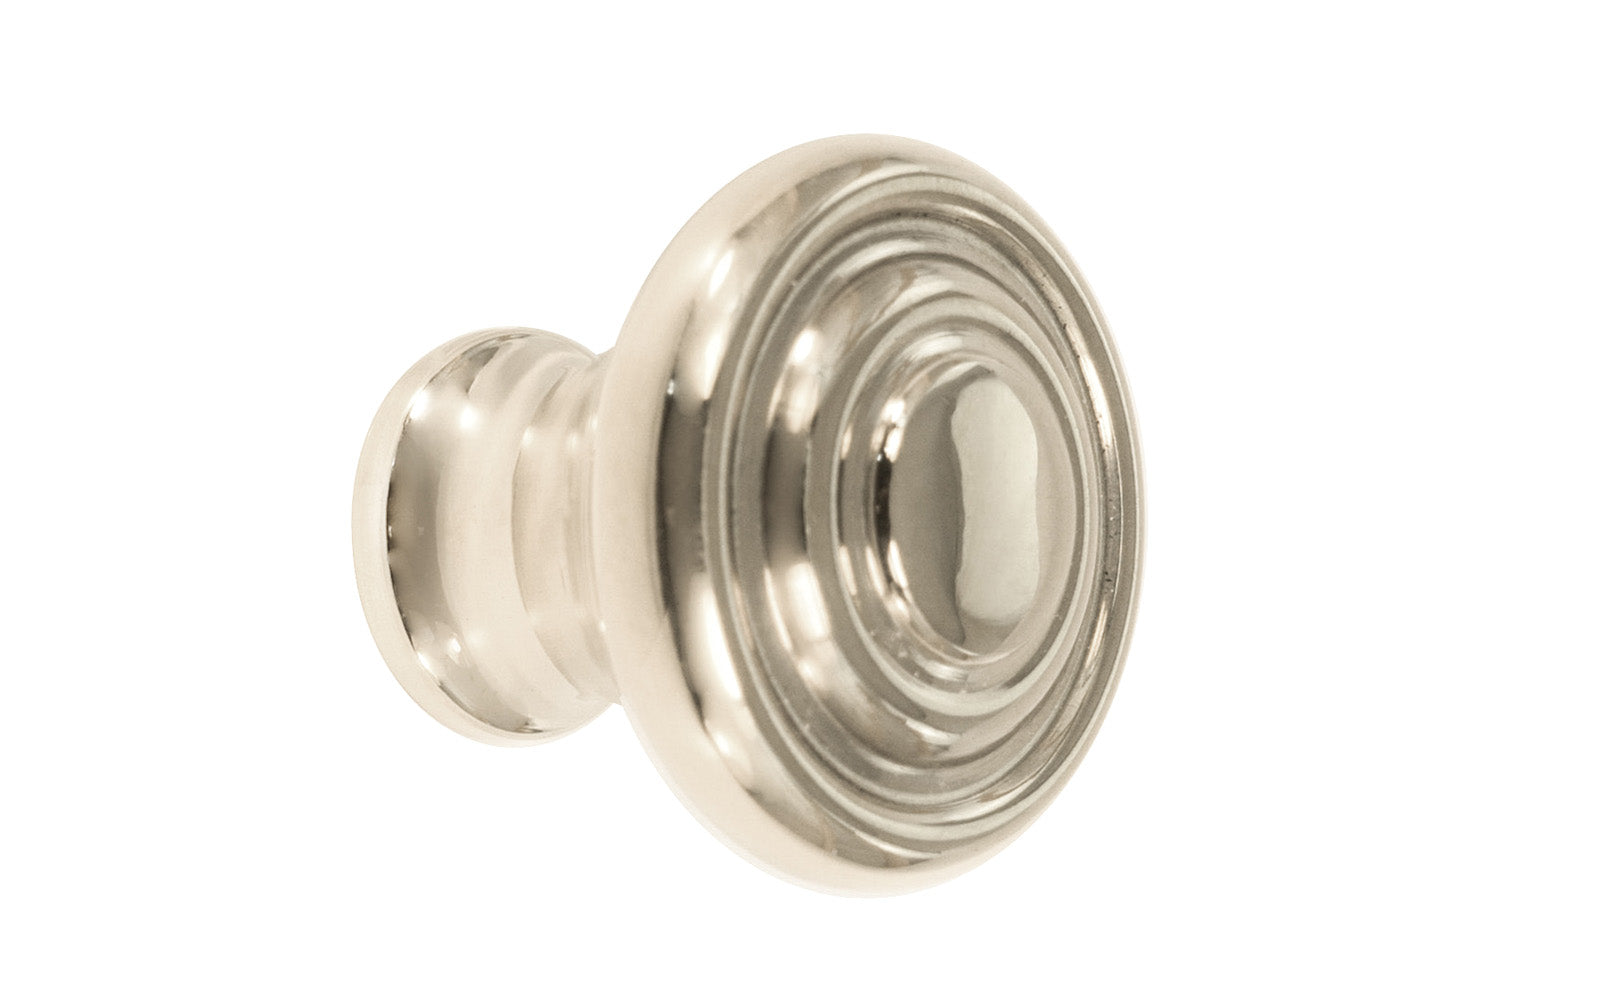 Classic "Art Deco" style cabinet round knob with a retro 1930's look. It has a round smooth shape with ring steps on the top. Made of high quality solid brass. Designed in the 1930's, Streamline Moderne, Art Deco style. 1-3/16" diameter. Polished Nickel finish.